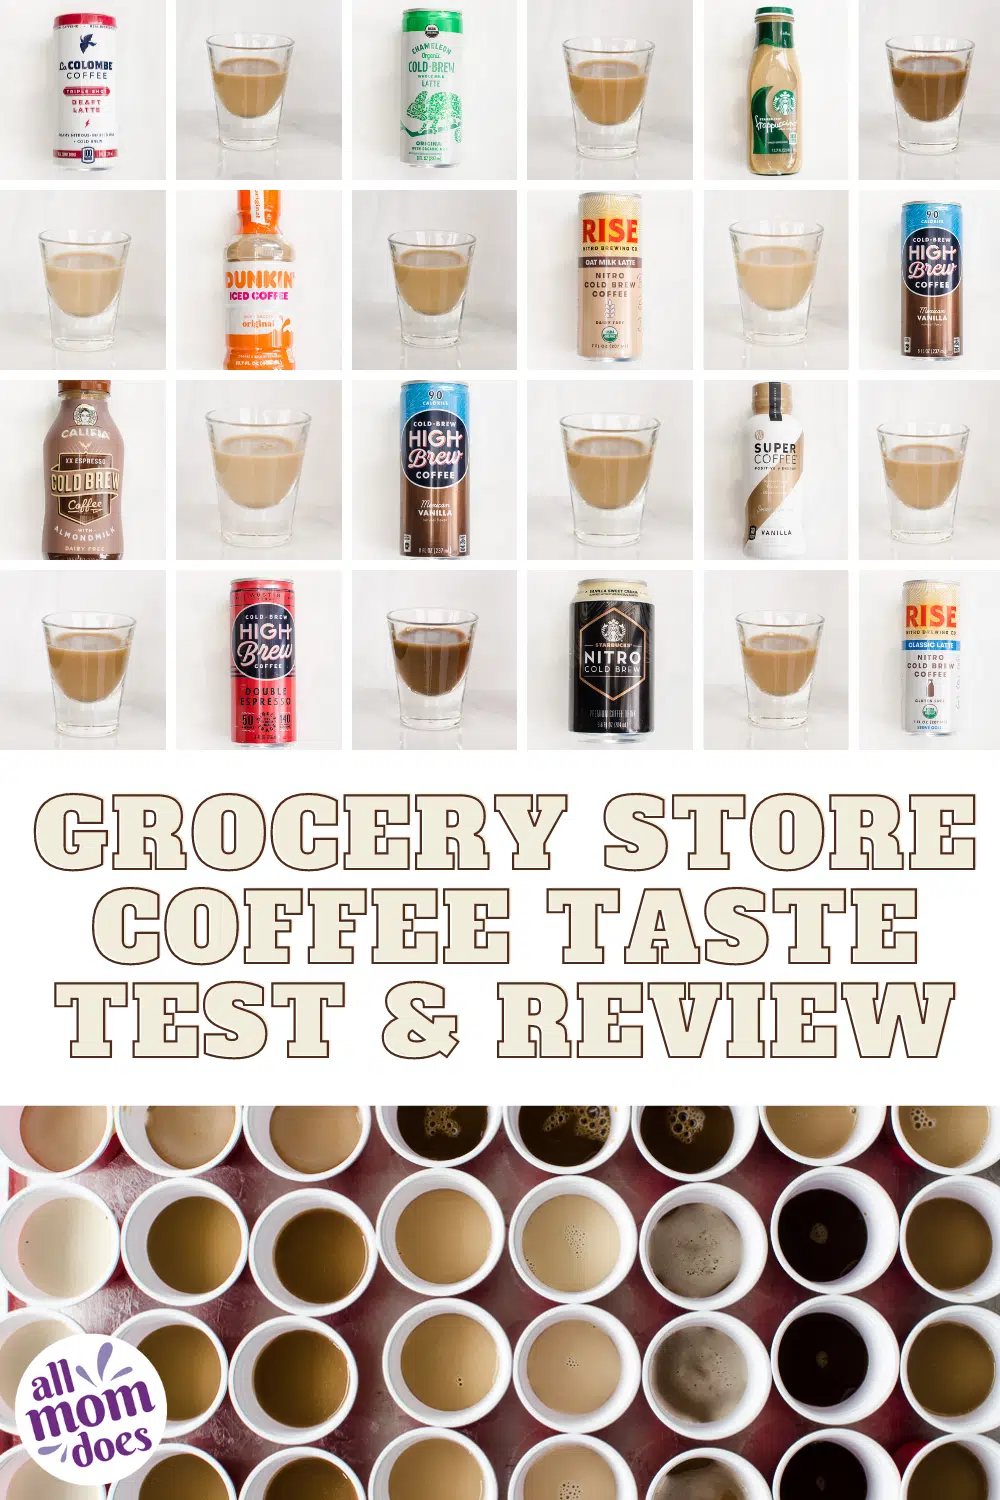 canned bottled coffee review taste test